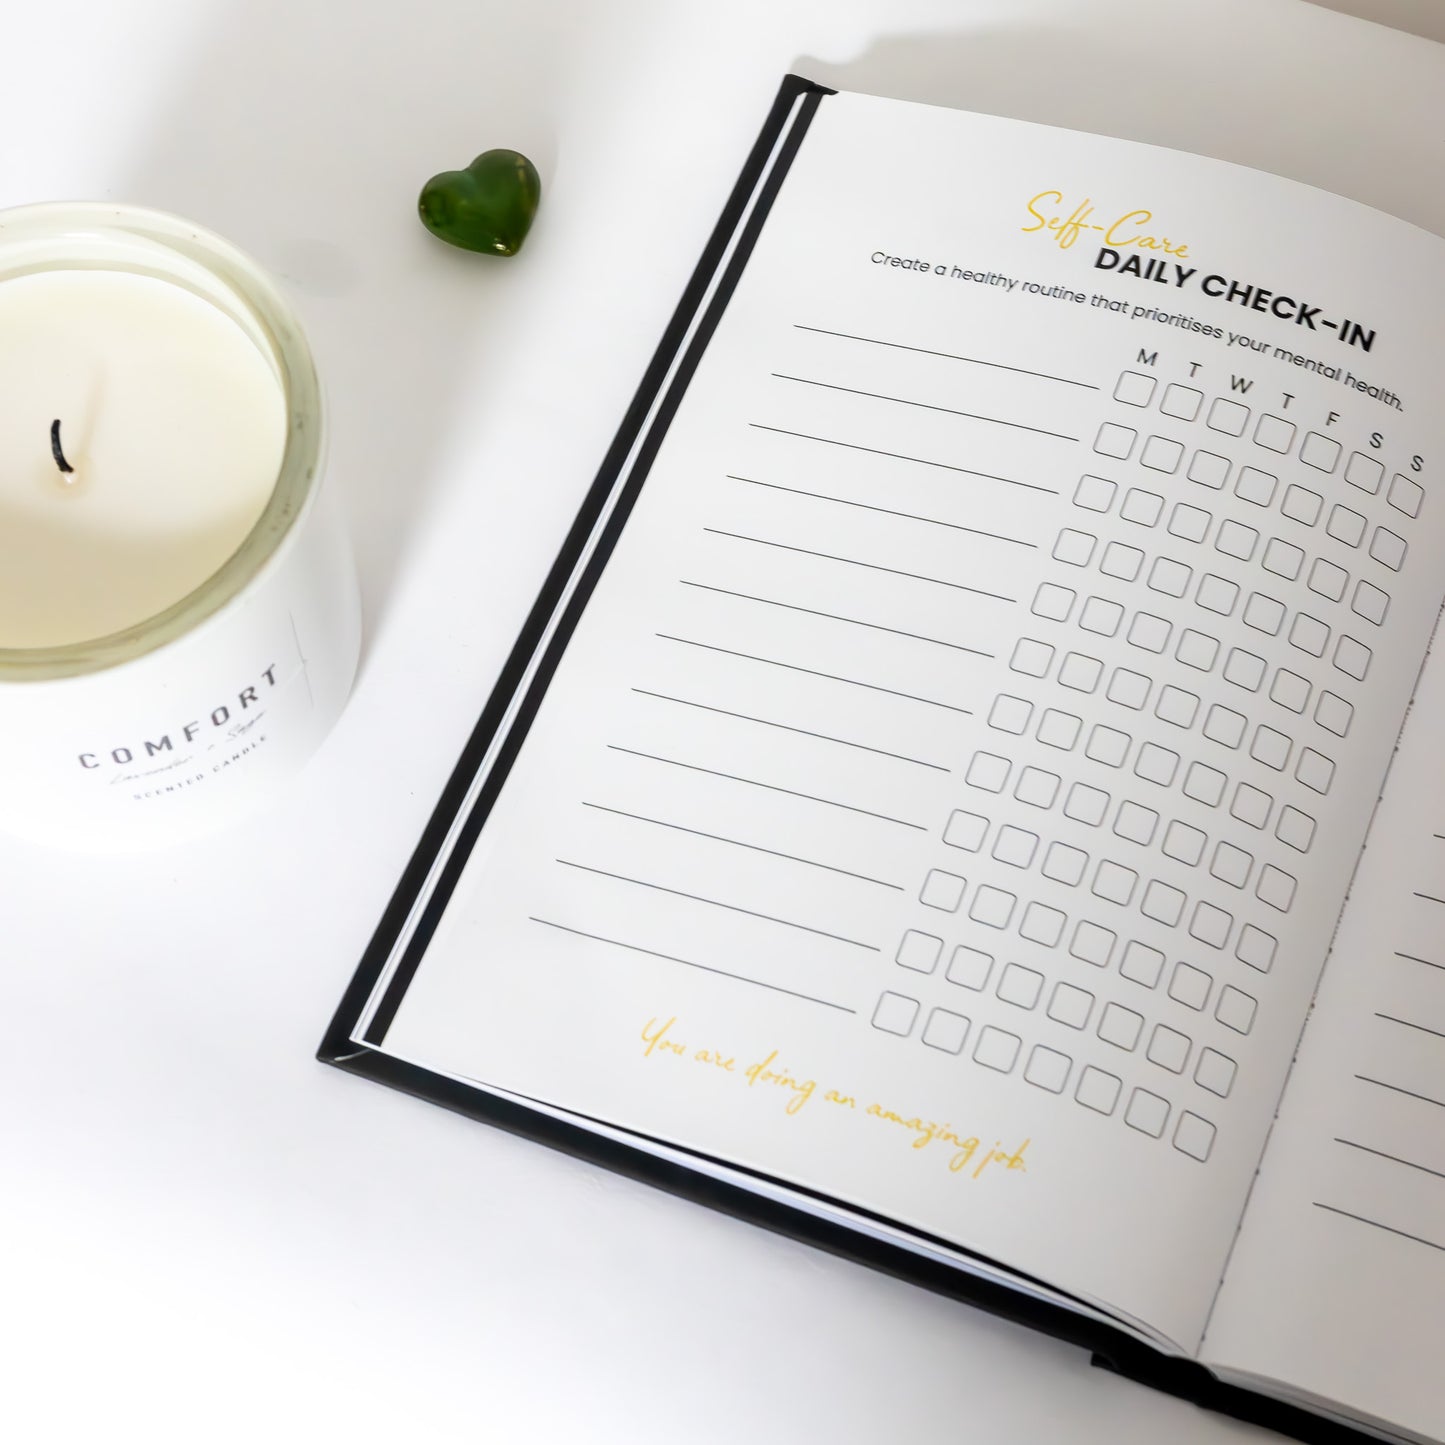 Filmmaking planner, open on the self-care daily check-in page, next to a candle for aesthetic purposes on a white background